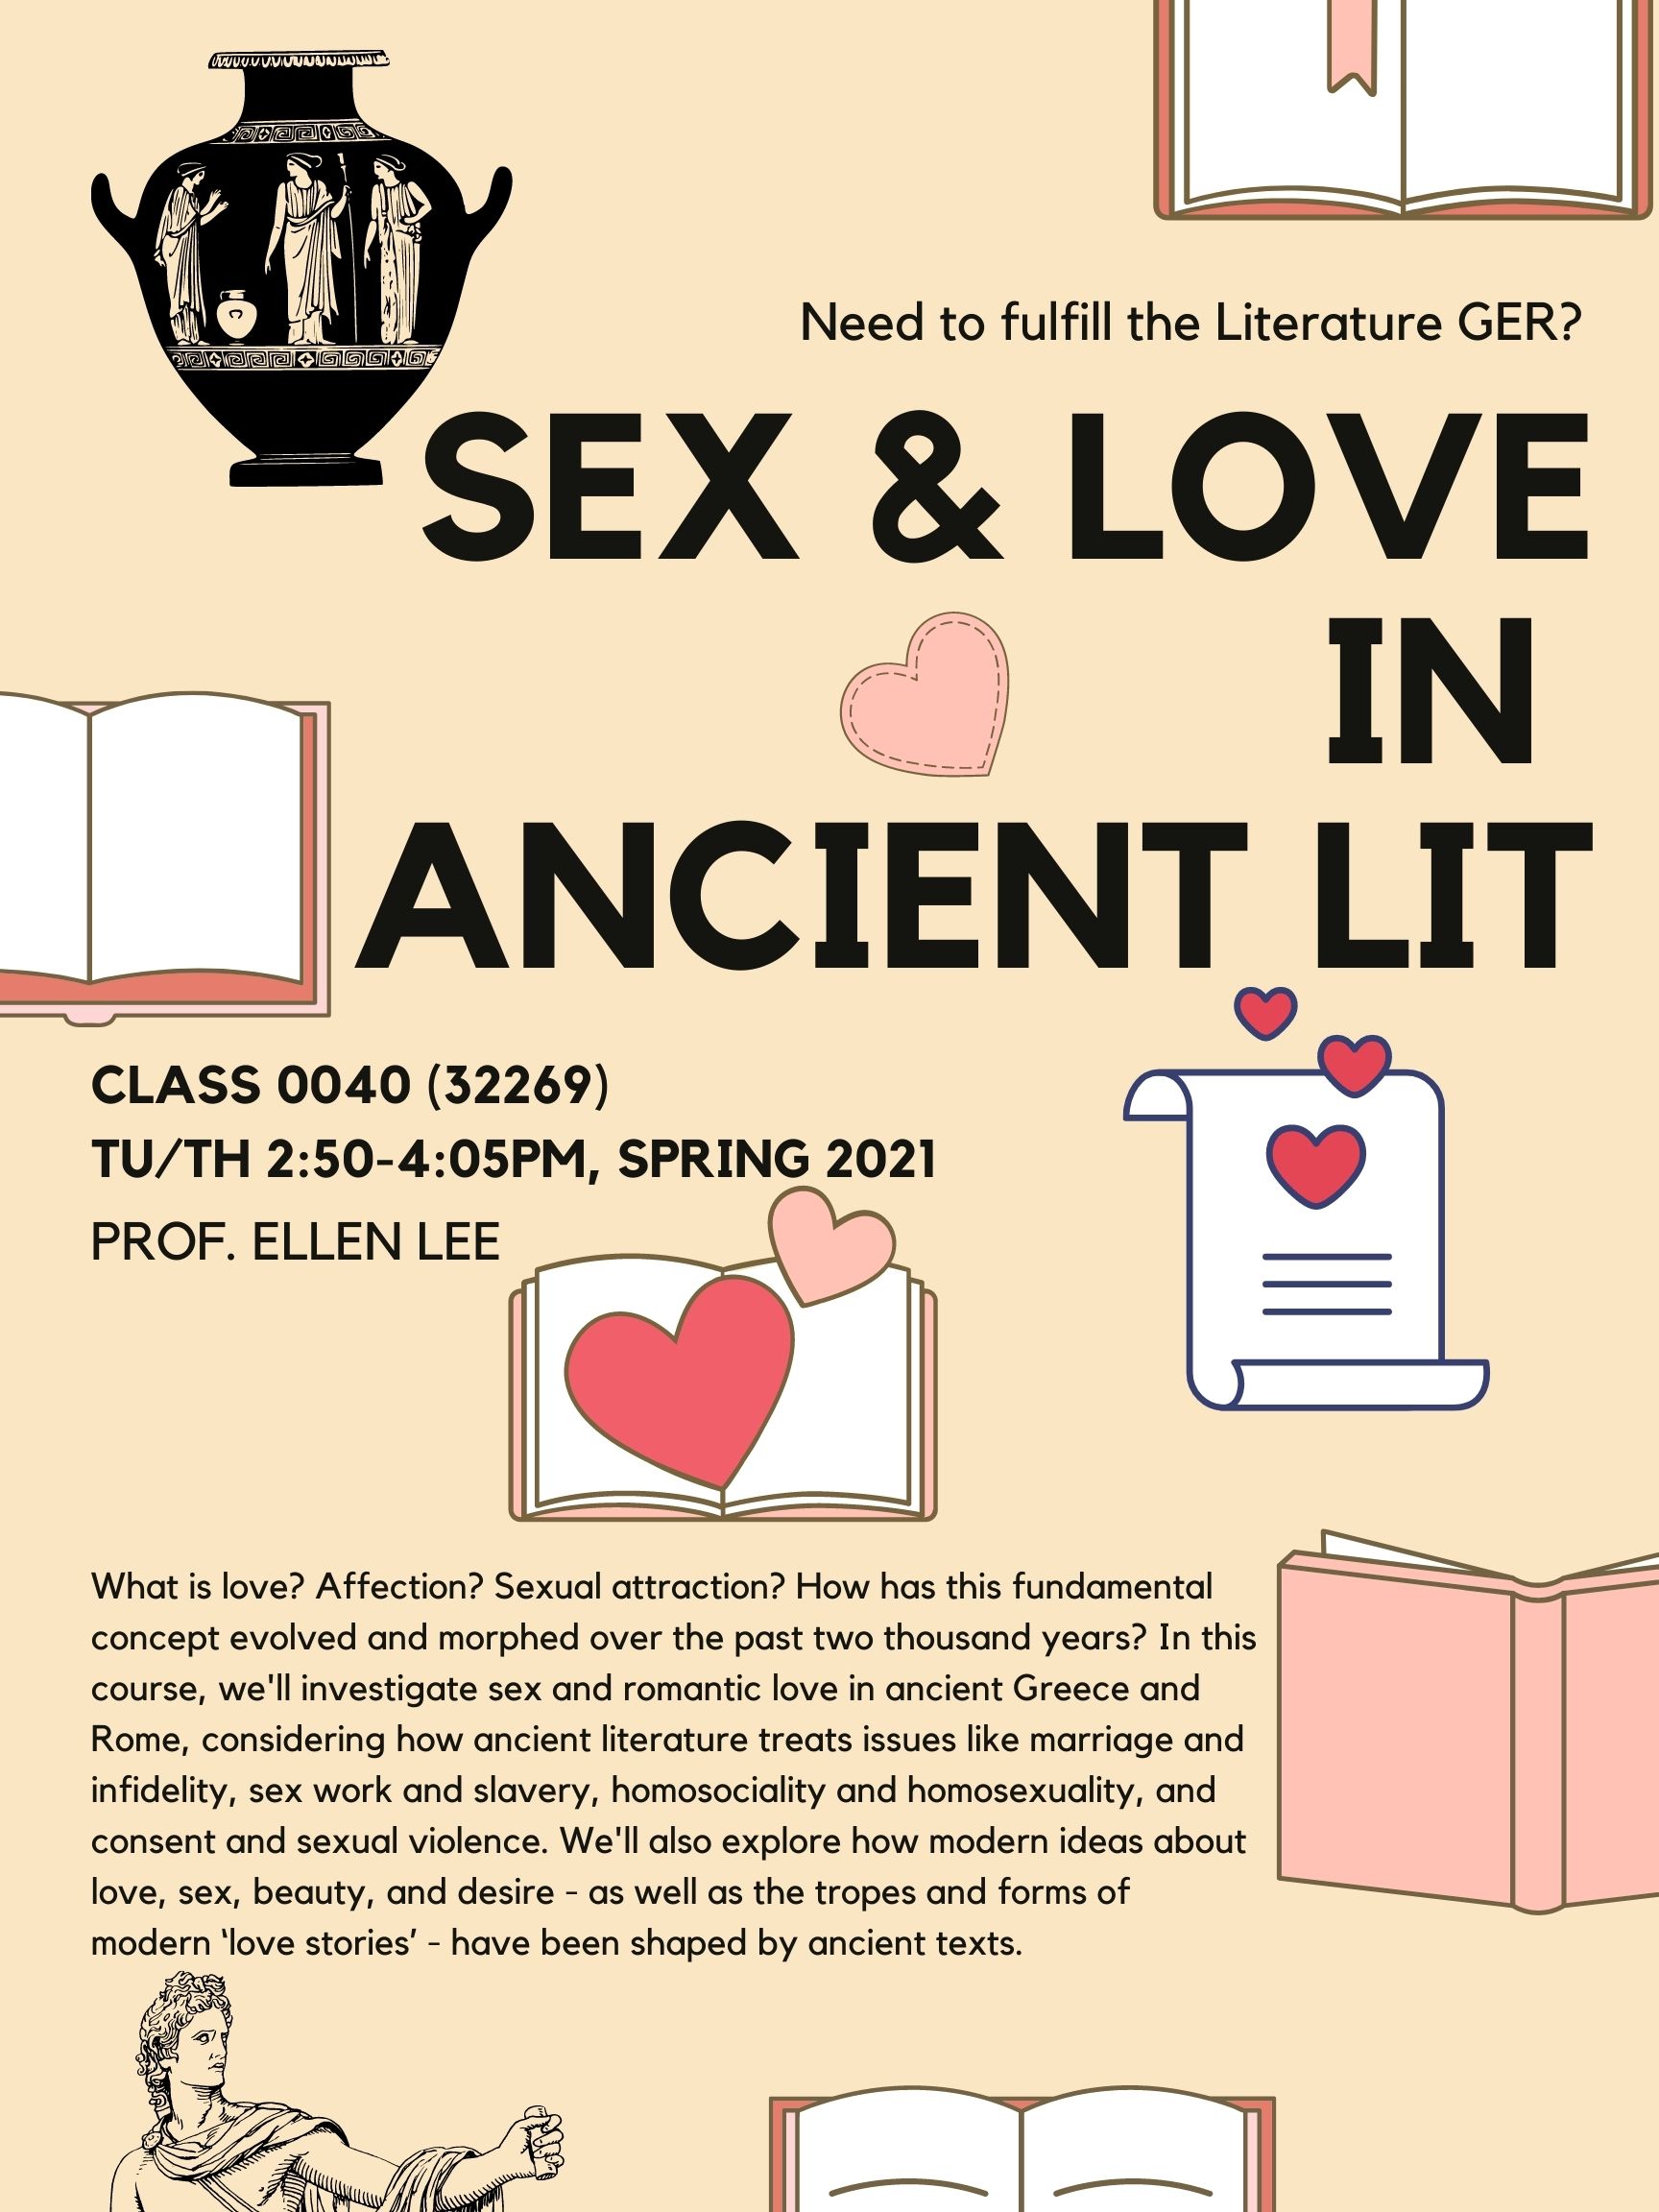 Need to fulfill the Literature GER? SEX & LOVE IN ANCIENT LIT CLASS 0040 (32269) TU/TH 2:50-4:05PM, SPRING 2021 PROF. ELLEN LEE What is love? Affection? Sexual attraction? How has this fundamental concept evolved and morphed over the past two thousand years? In this course, we'll investigate sex and romantic love in ancient Greece and Rome, considering how ancient literature treats issues like marriage and infidelity, sex work and slavery, homosociality and homosexuality, and consent and sexual violence. We'll also explore how modern ideas about love, sex, beauty, and desire - as well as the tropes and forms of modern ‘love stories’ - have been shaped by ancient texts. This flyer consists of a Hellenistic vase, books, and pink hearts, on a beige background.